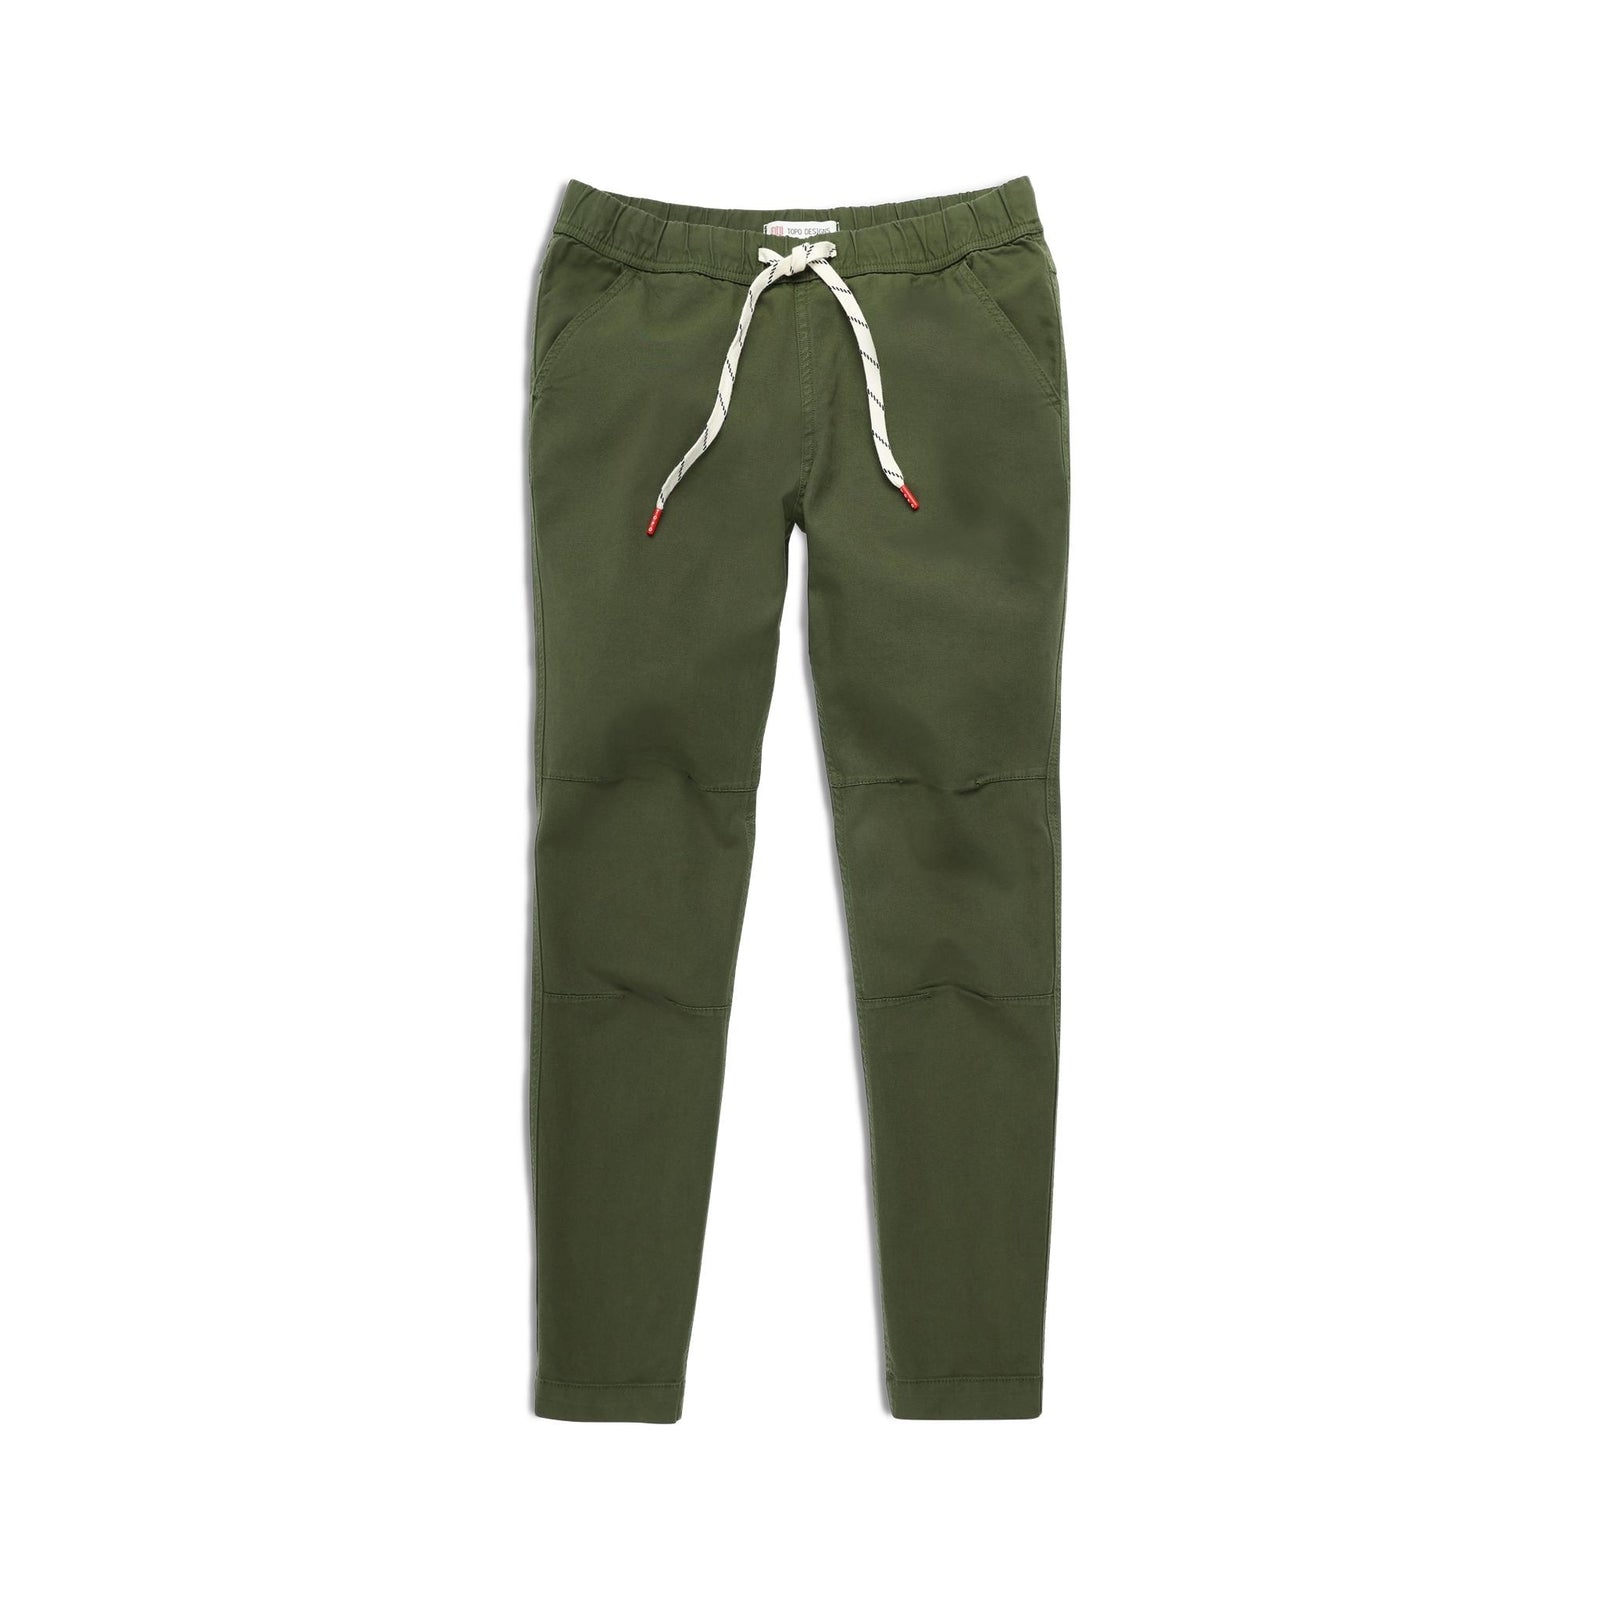 Front View of Topo Designs Dirt Pants Slim - Women's in "Olive"